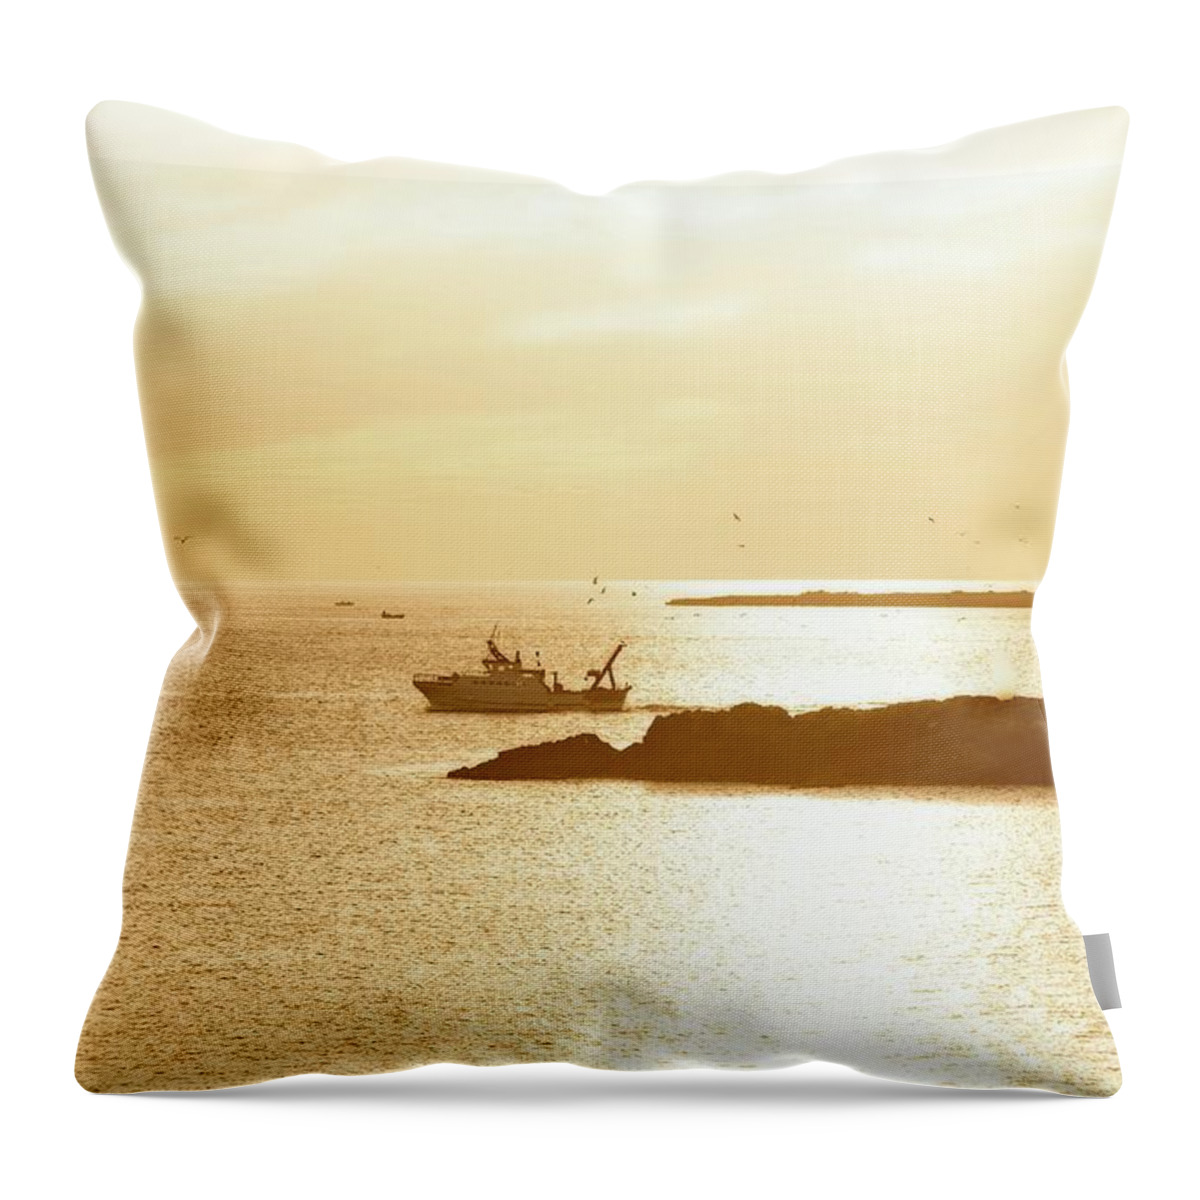 Landscape Throw Pillow featuring the photograph Bringing The Days Catch by Allan Van Gasbeck